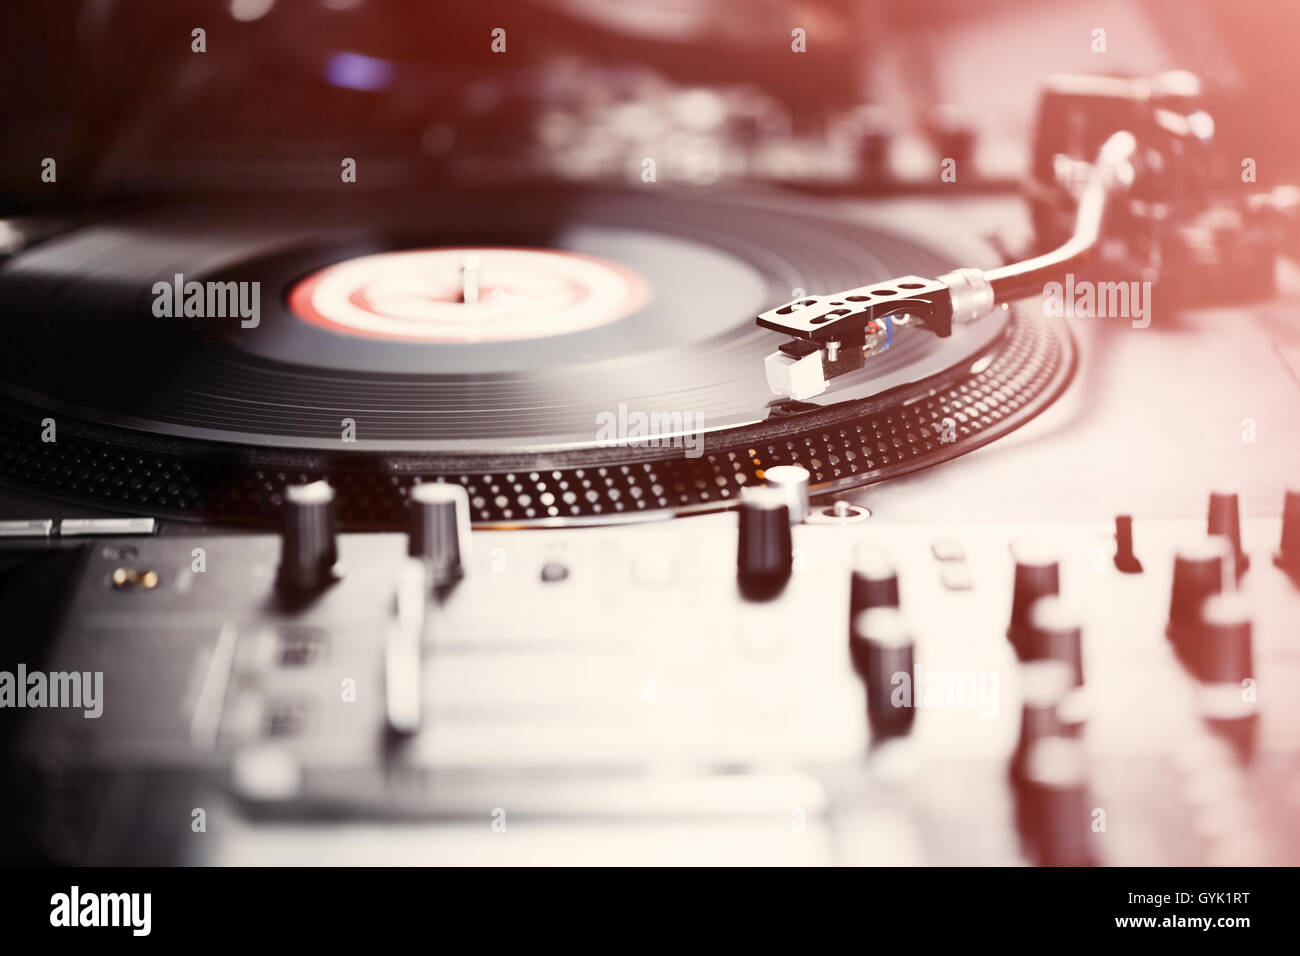 Turntable vinyl record player, analog sound technology for DJ playing analog and digital music. Close up, macro of equipment for professional studio, concert, event. Stock Photo